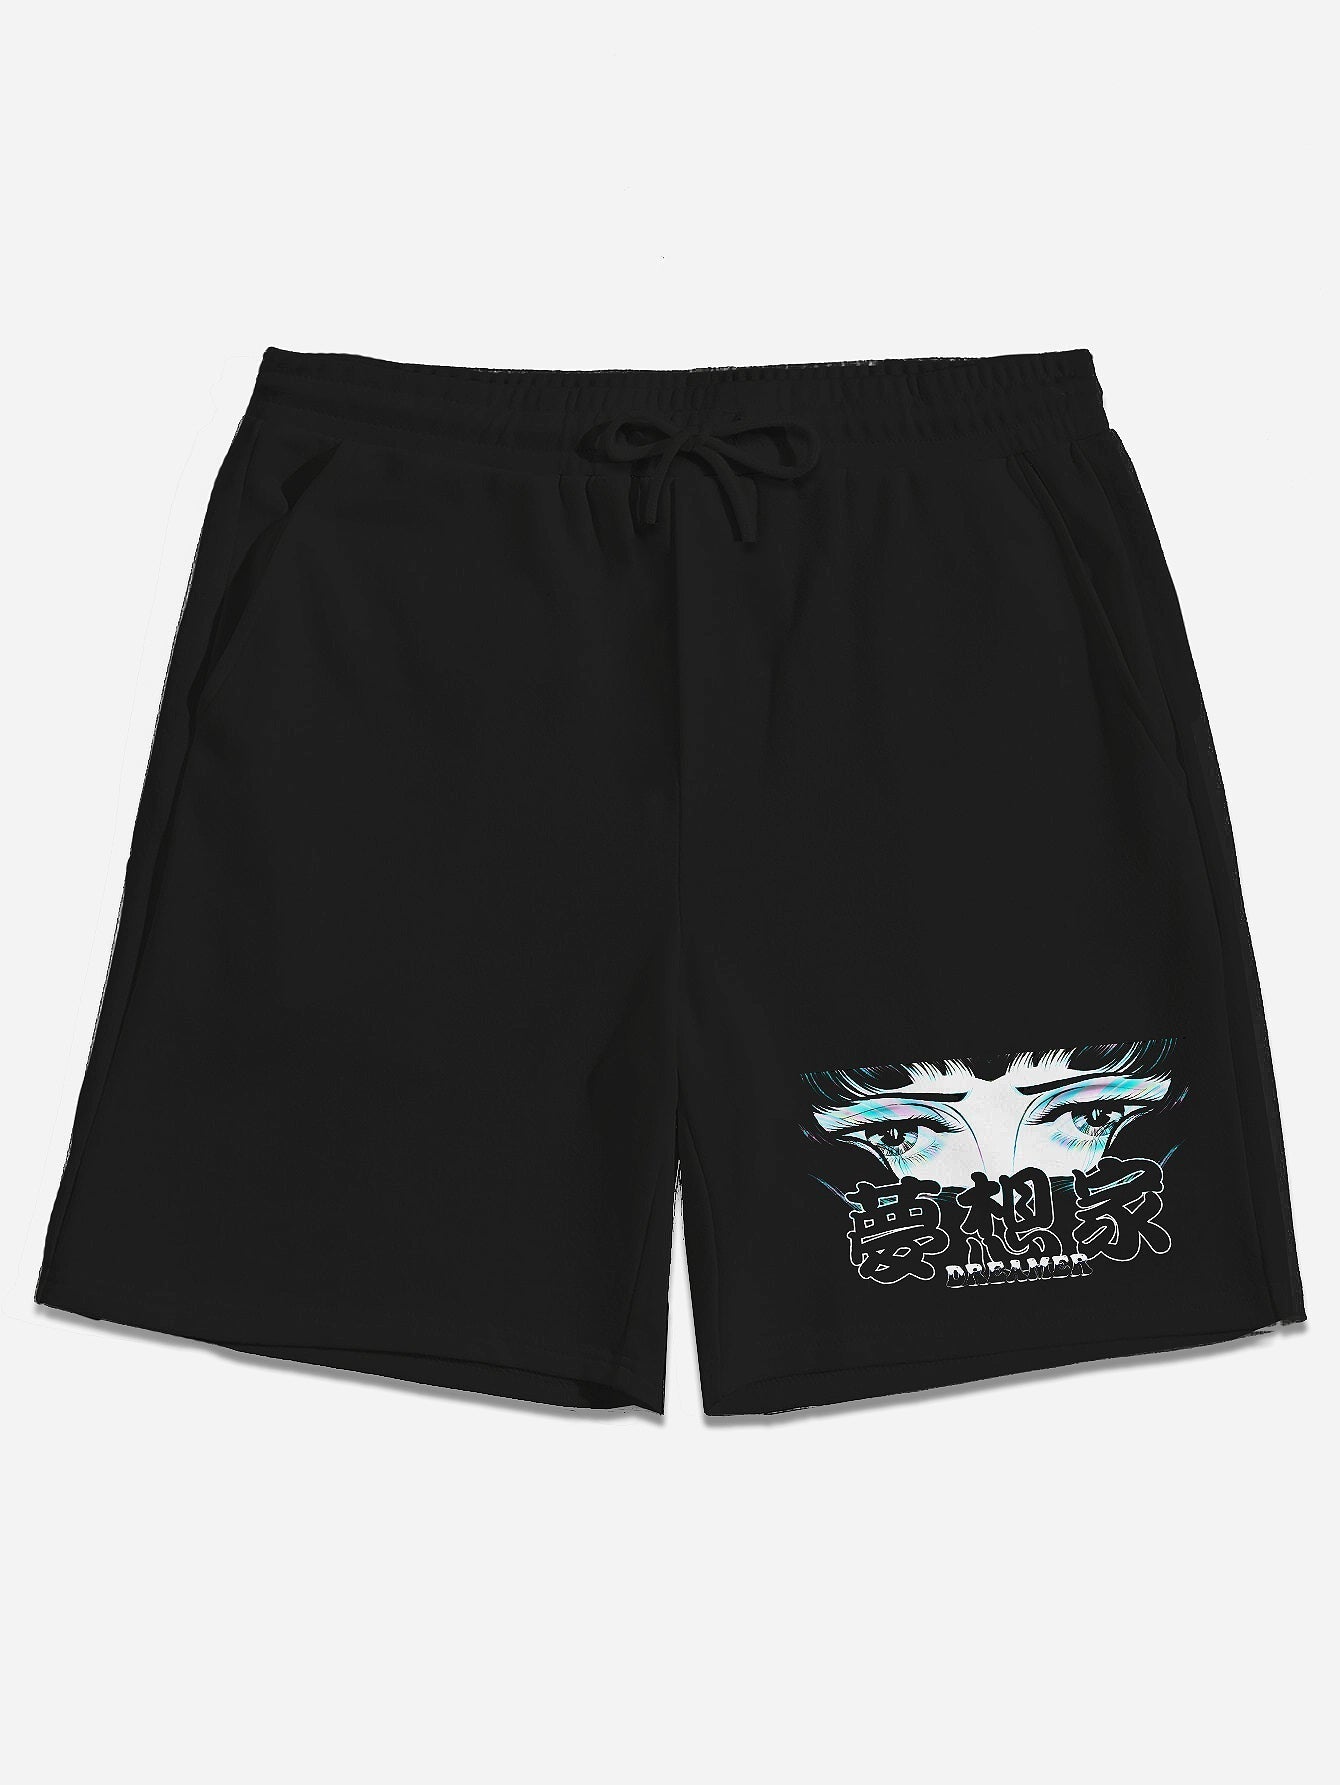 Dreamer Black Mid-Length Shorts - In Control Clothing